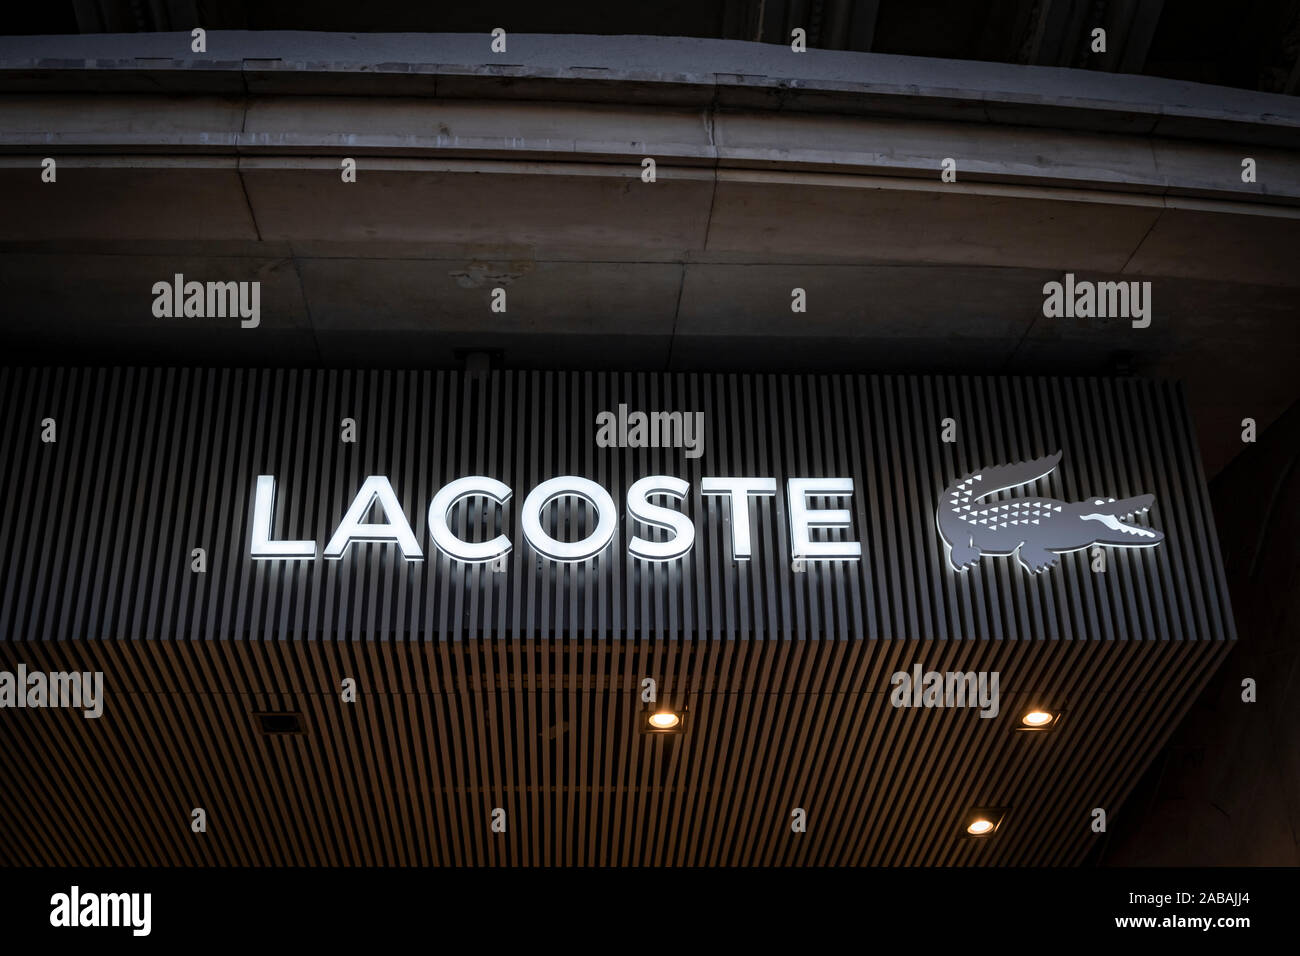 logo of Lacoste, French manufacturer of luxury and accessories seen at the Passeig de Gràcia store.A boulevard of just over a kilometre, the Passeig de Gràcia store brings